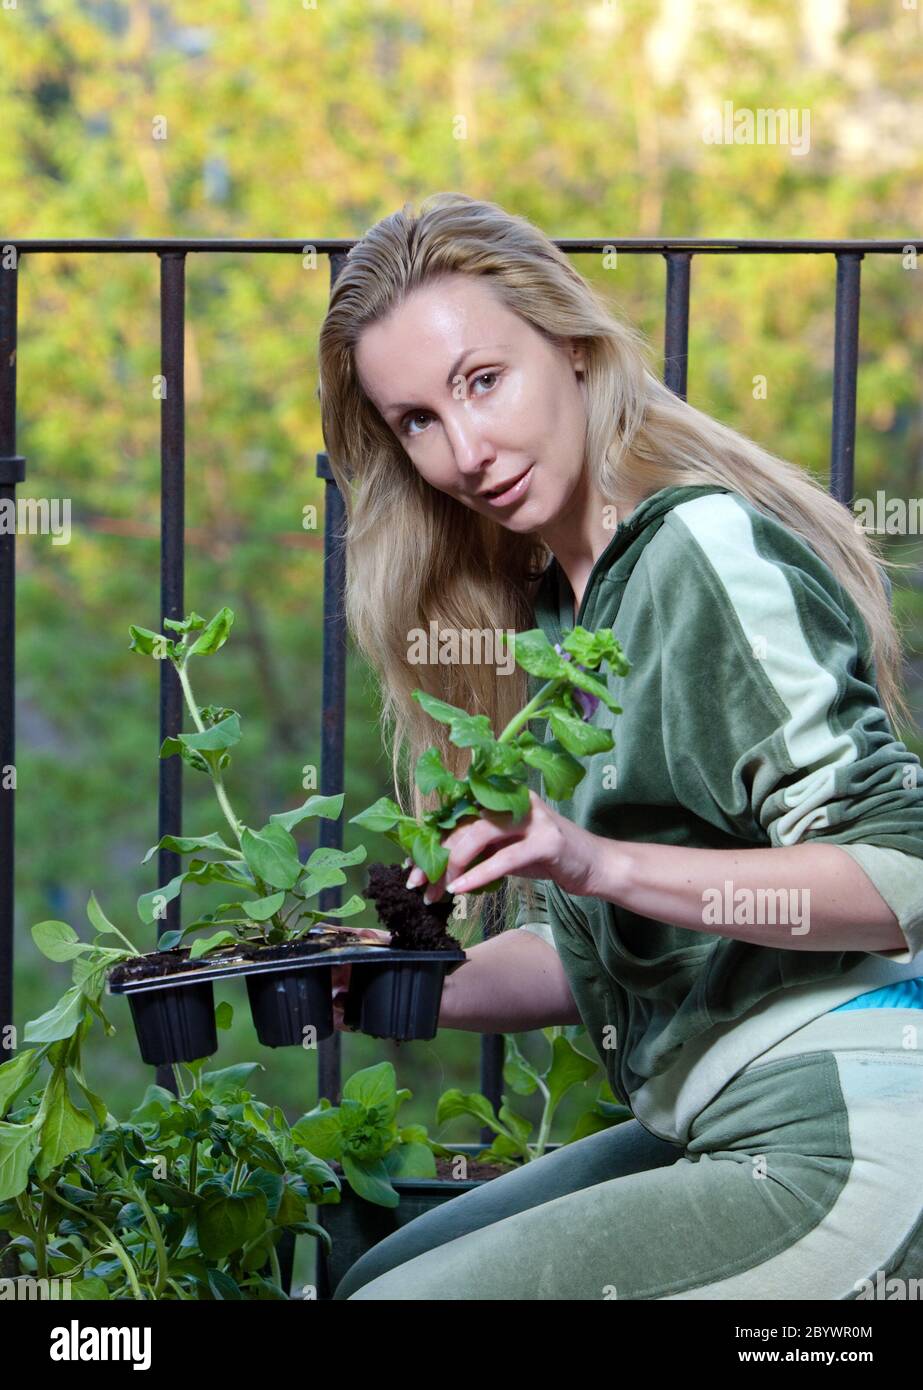 young woman and box with petunia flowers seedling Stock Photo